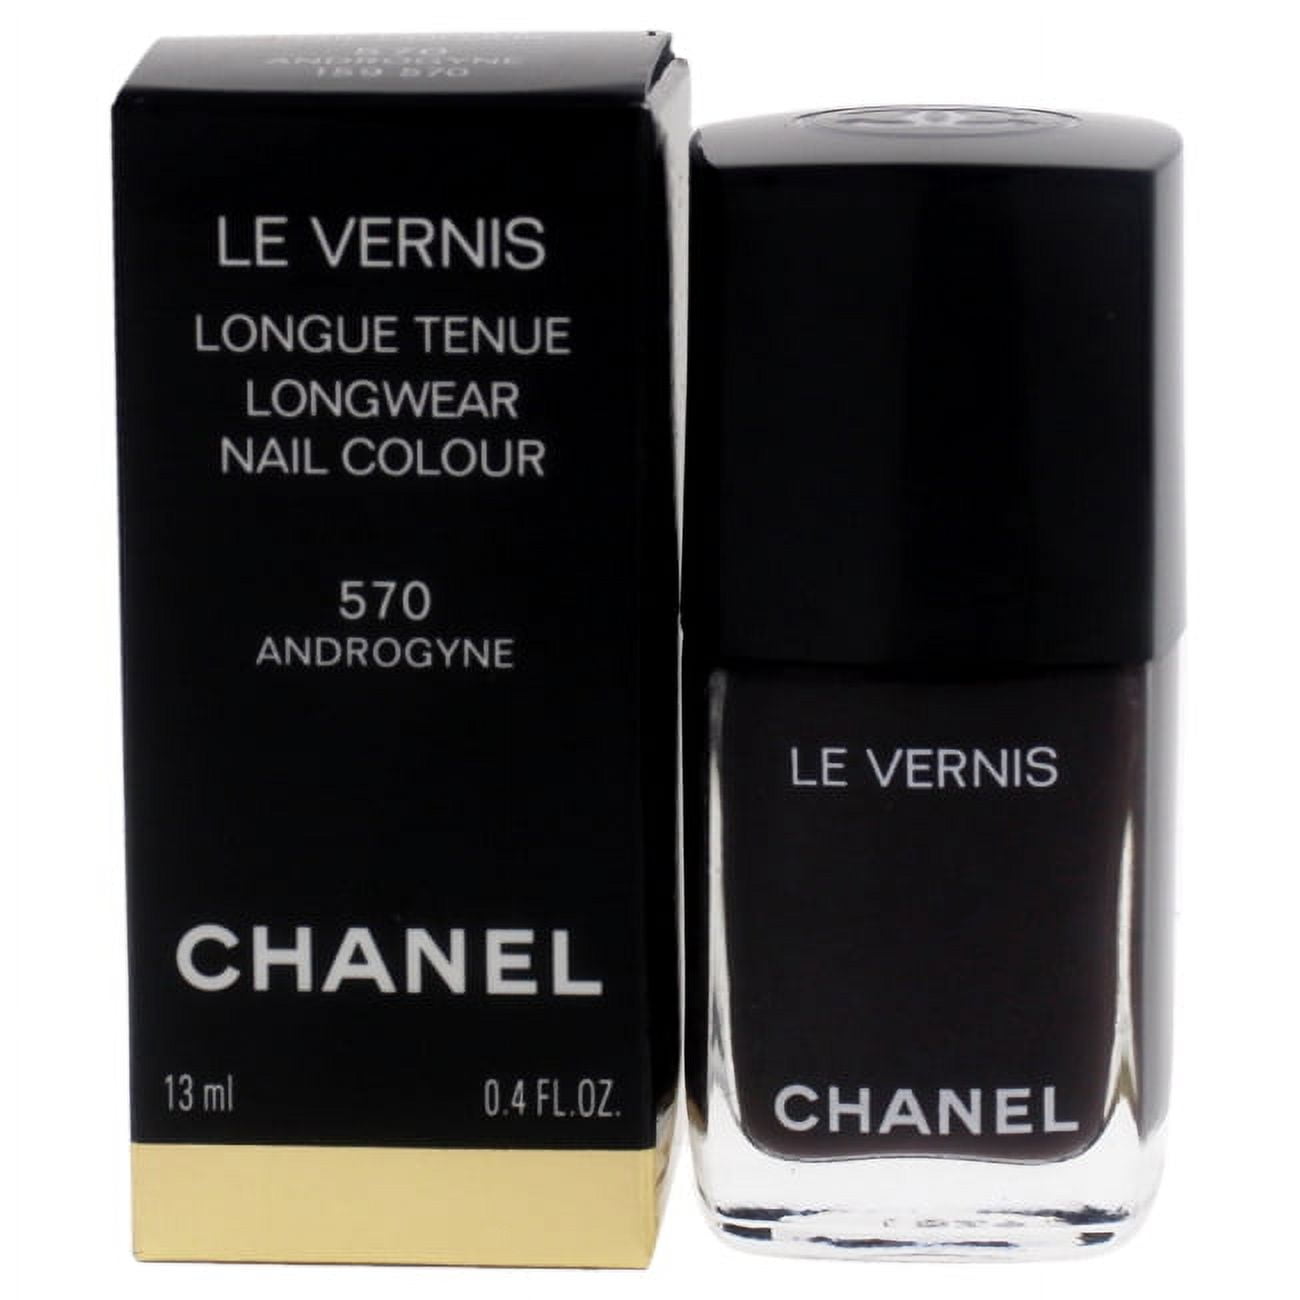 Chanel in #566 Washed Denim, #568 Tulle, #570 Androgyne, and #572  Emblématique Swatches + Comparisons